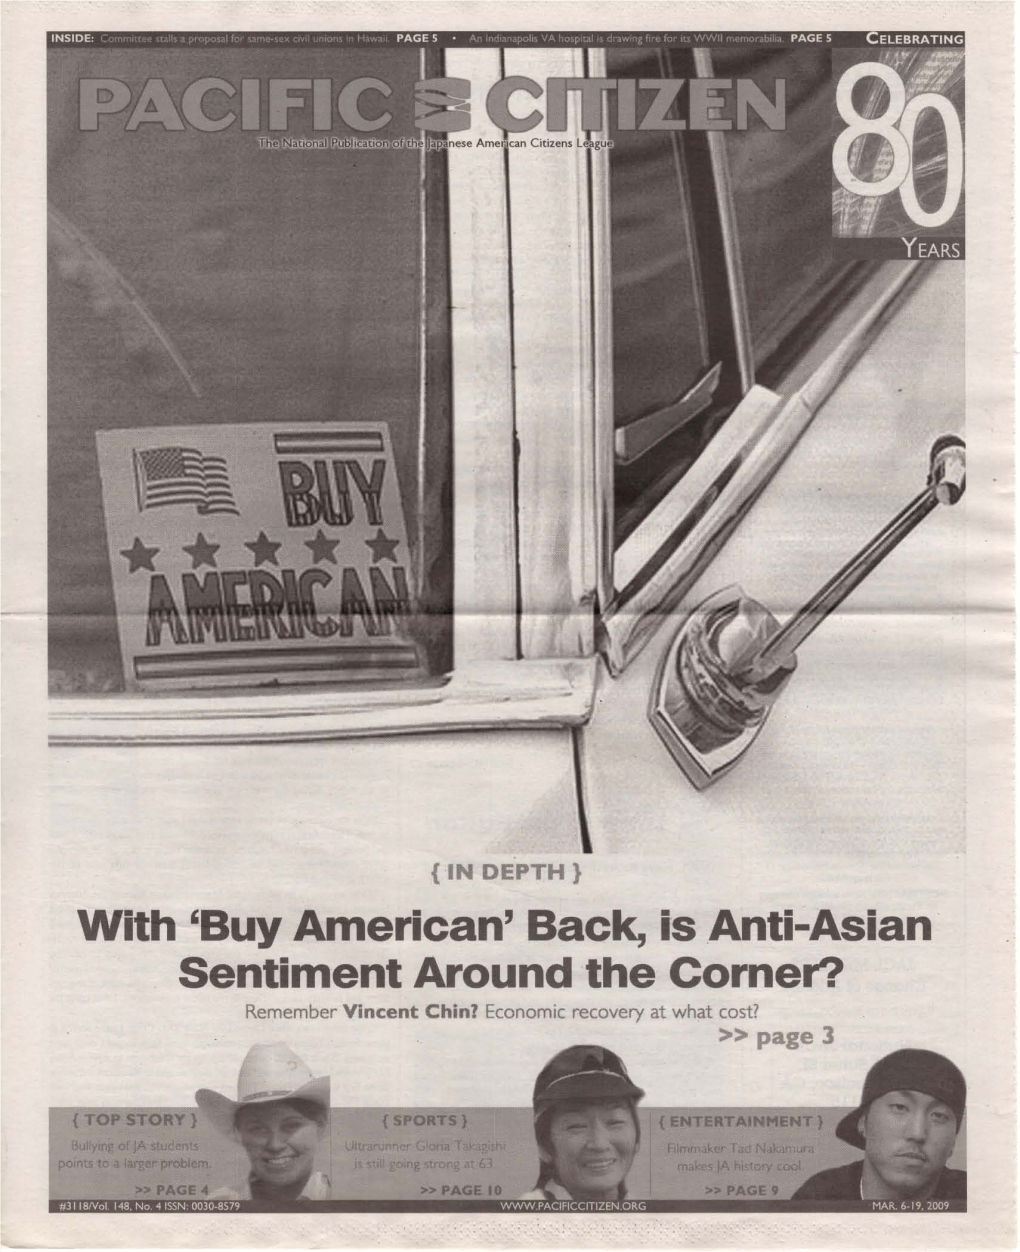 'Buy American' Back, Isanti-Asian· Sentiment Around "The Corner? Remember Vincent Chin? Economic Recovery at What Cost? »Page L